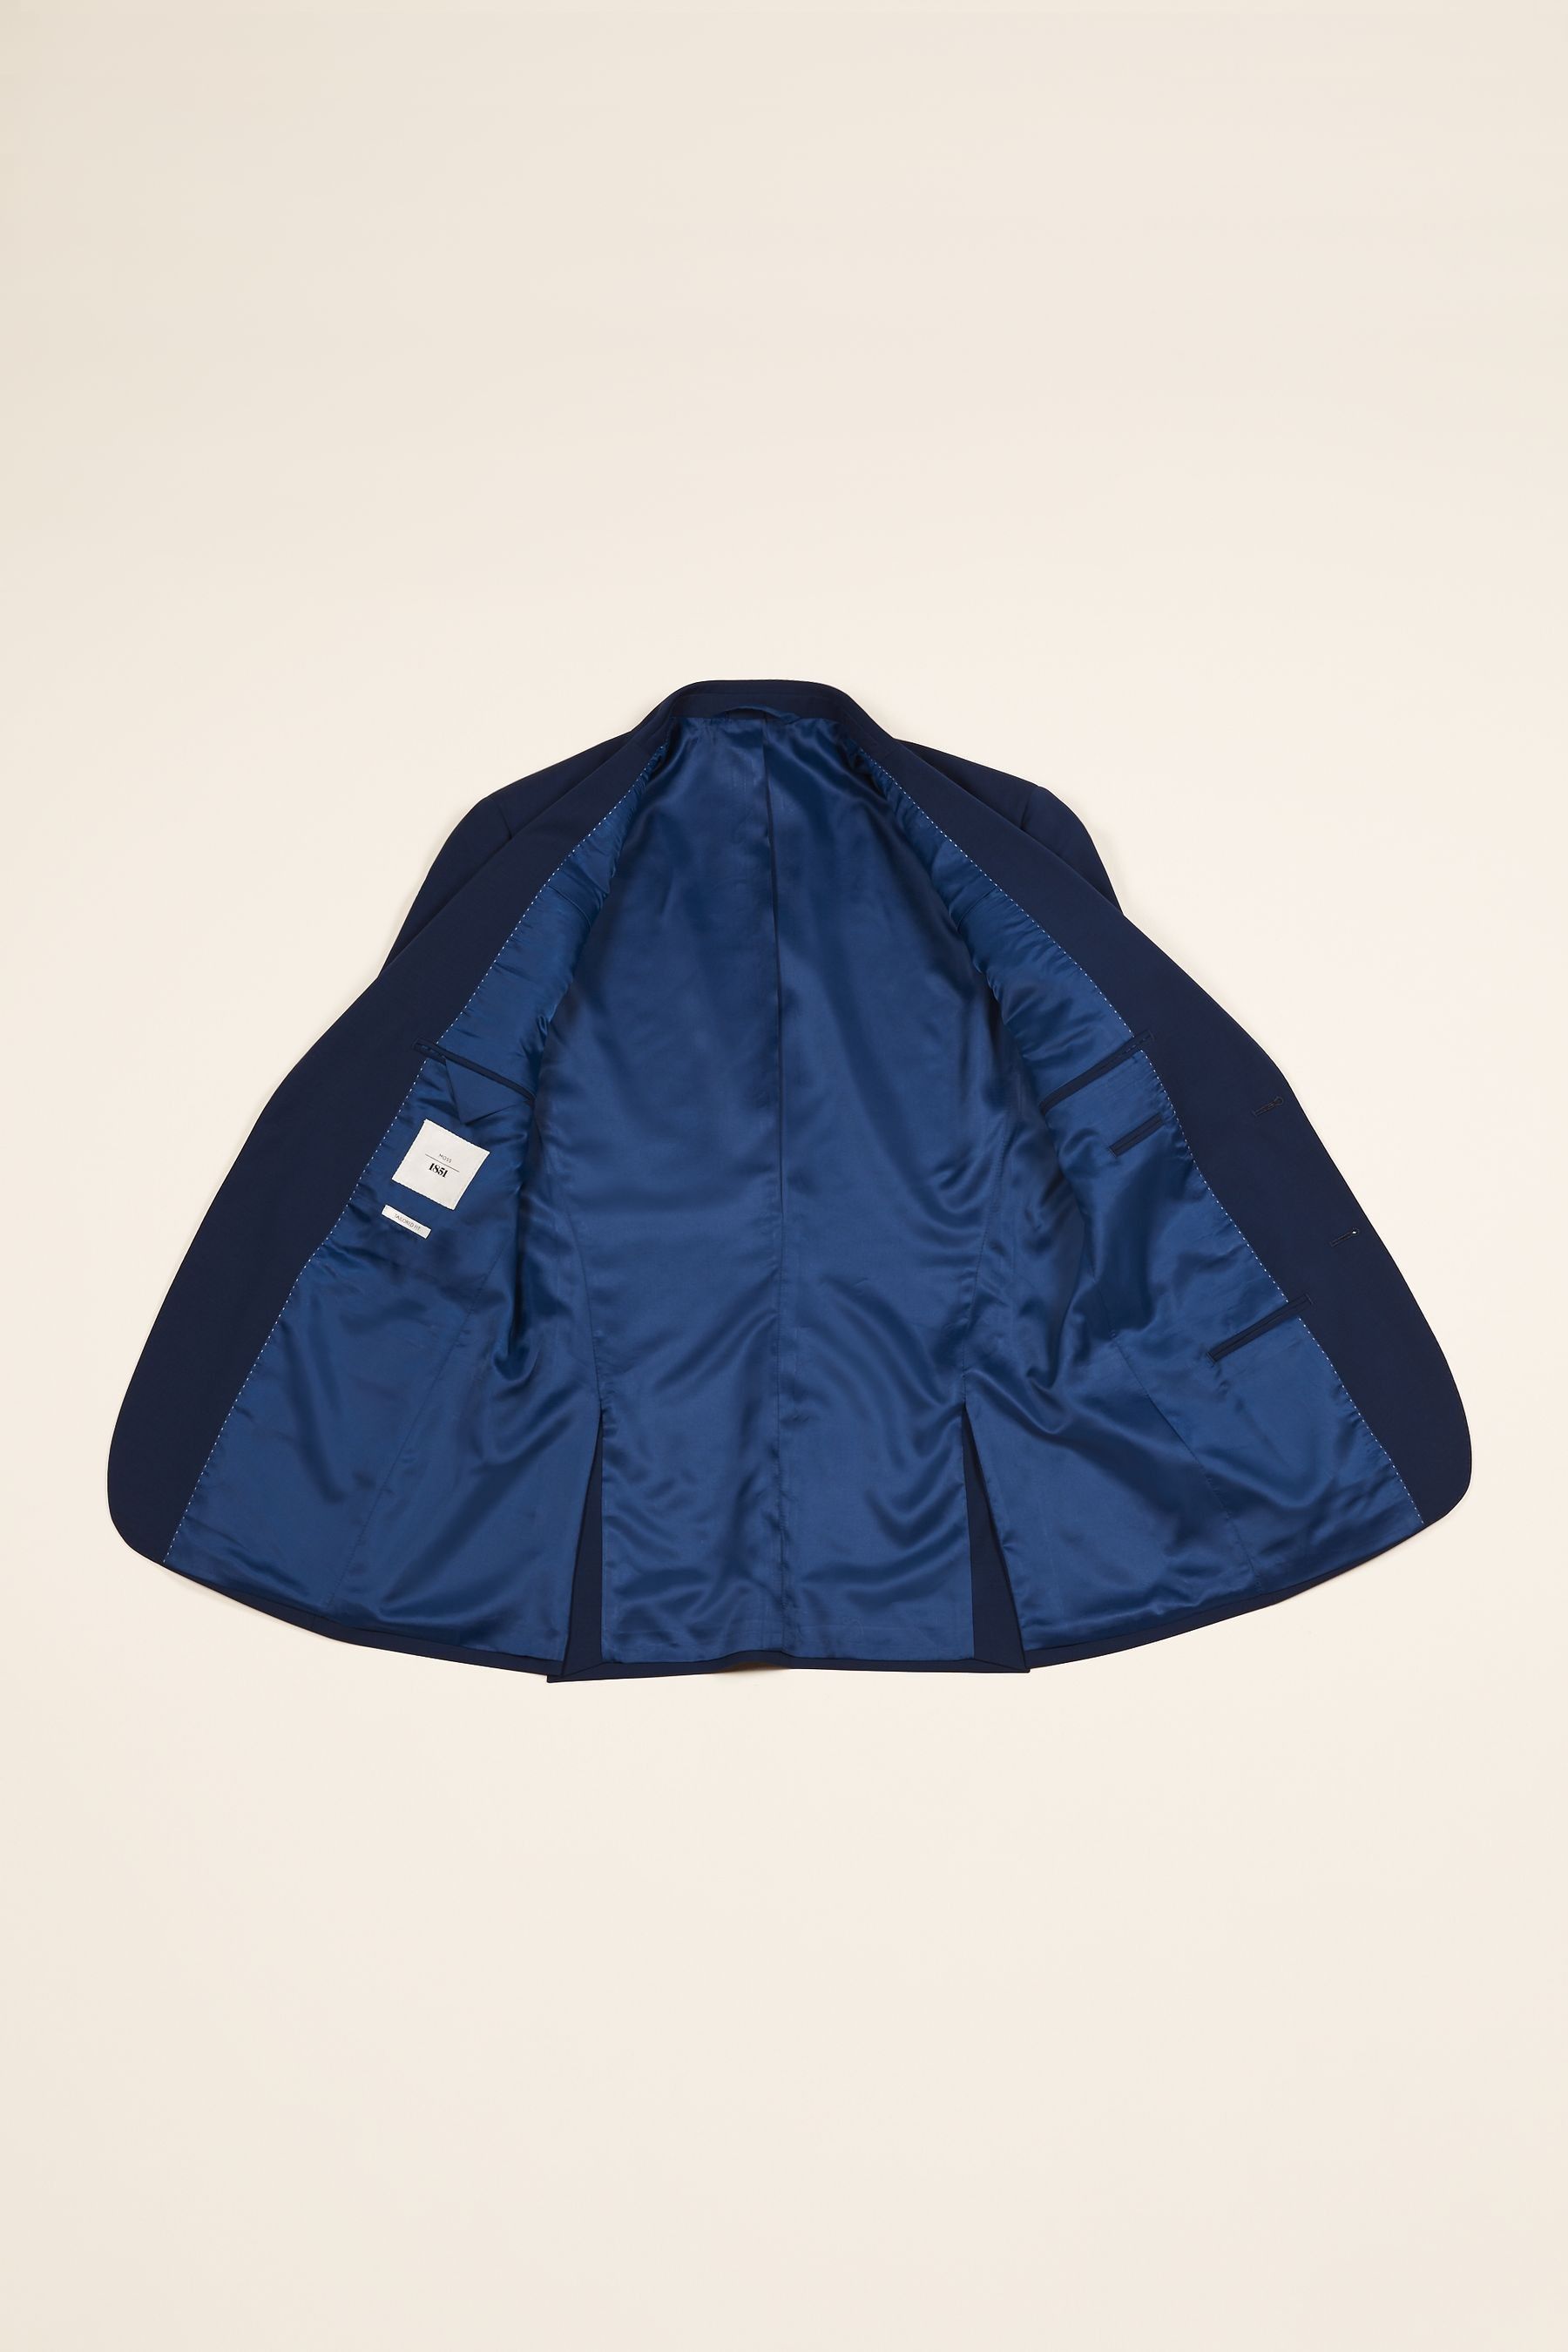 Buy MOSS Performance Royal Blue Suit: Jacket from the Next UK online shop